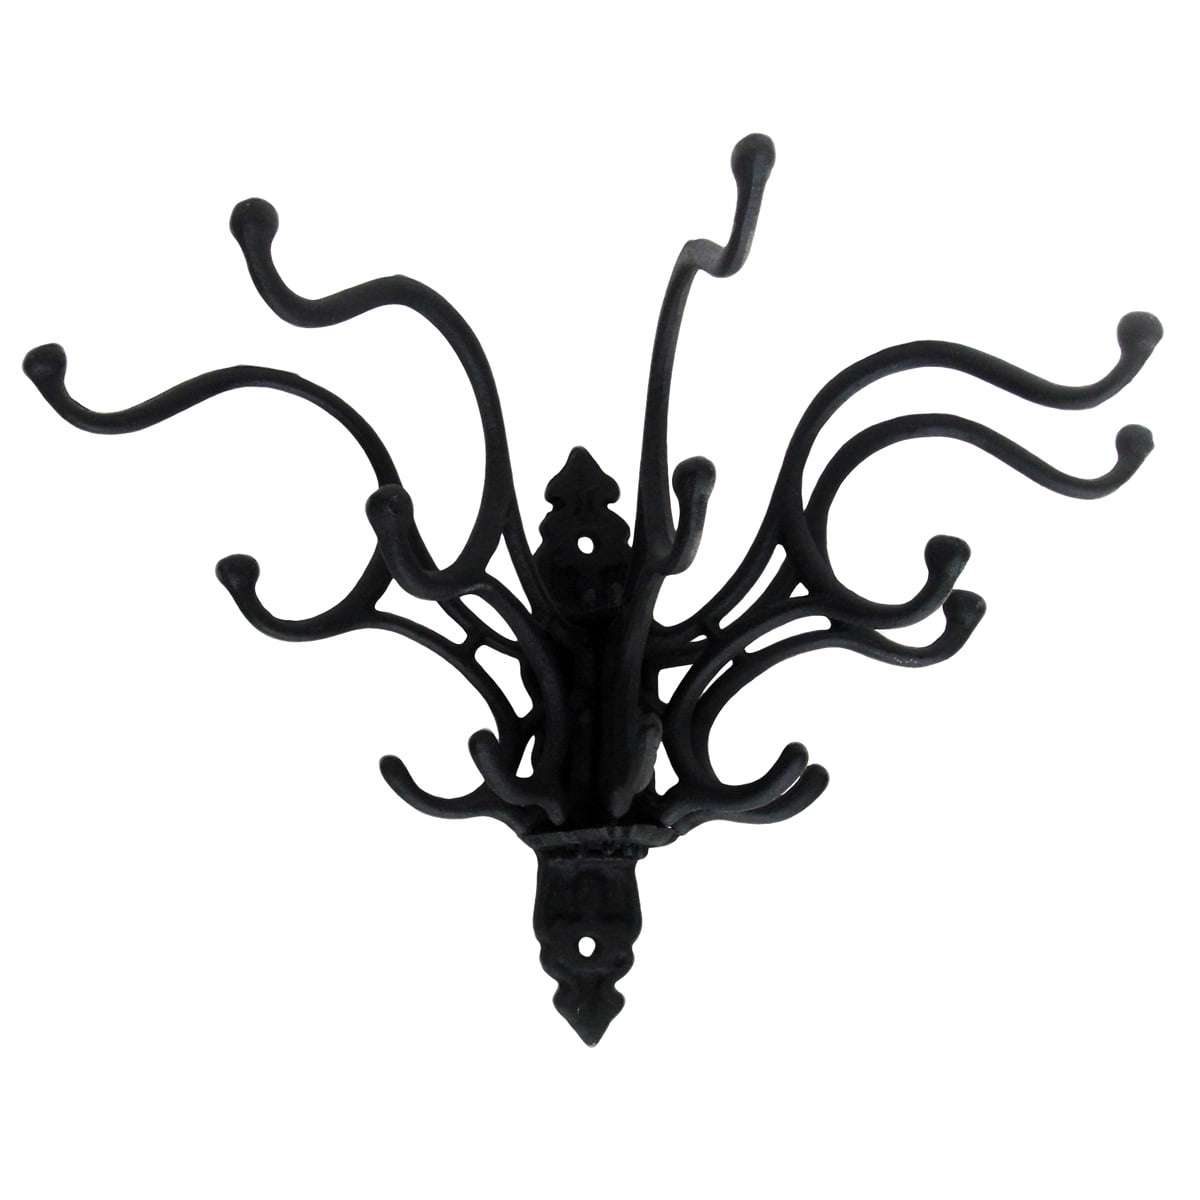 Details about   20 Cast Iron Antique Style HD SCHOOL HOOKS Coat Hat Hook Rack Hall Tree BROWN 